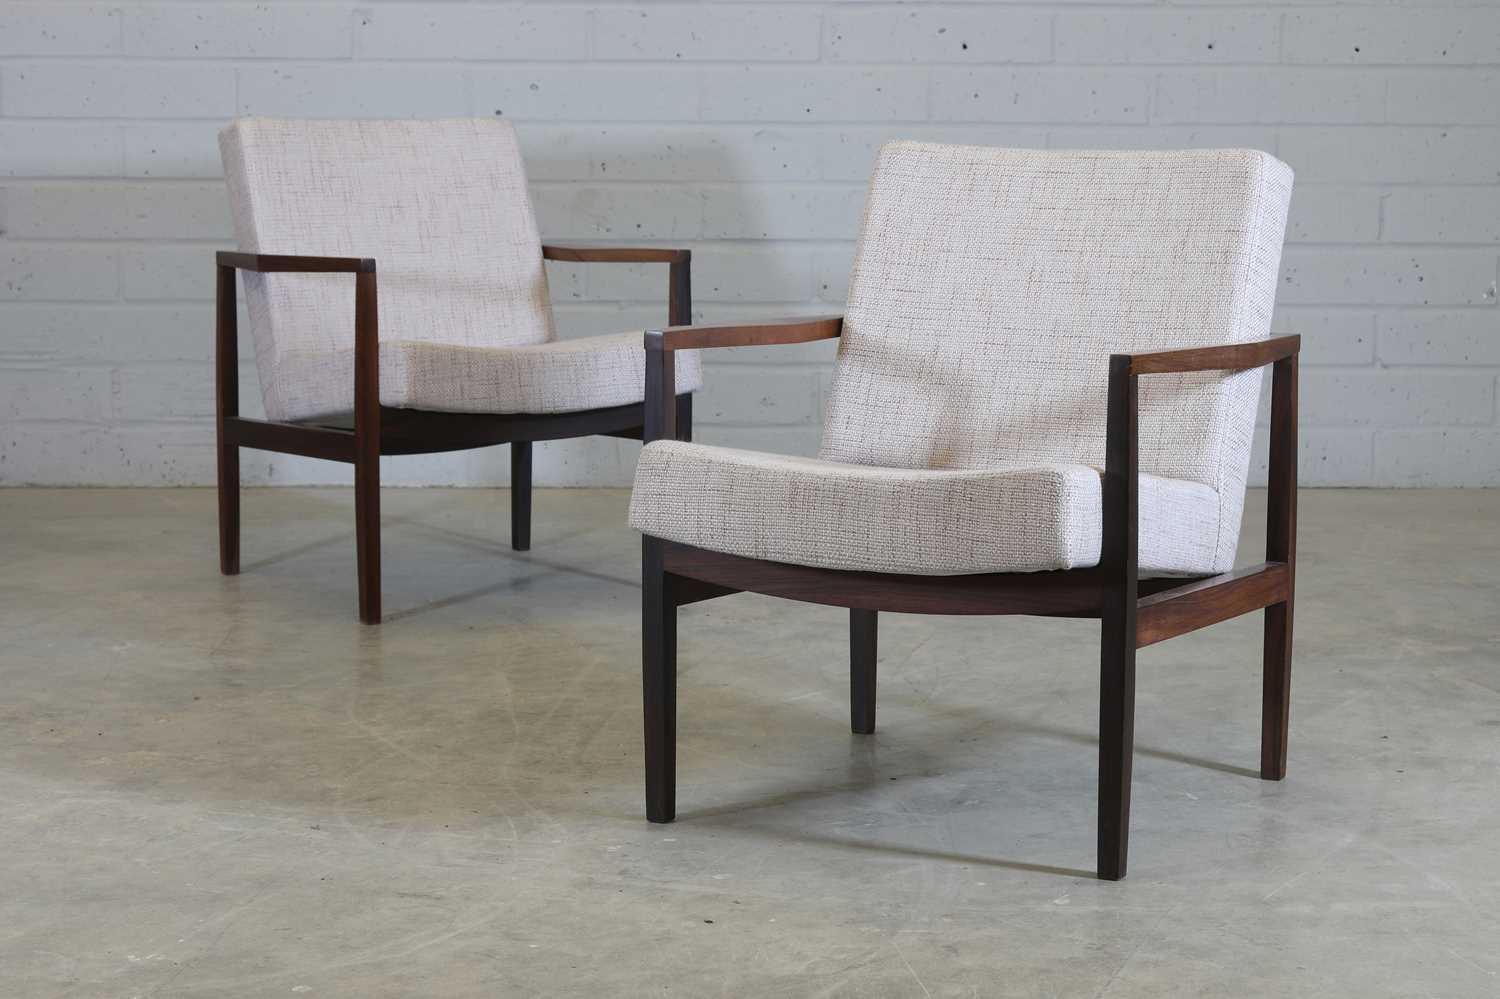 § A pair of Brazilian rosewood armchairs,